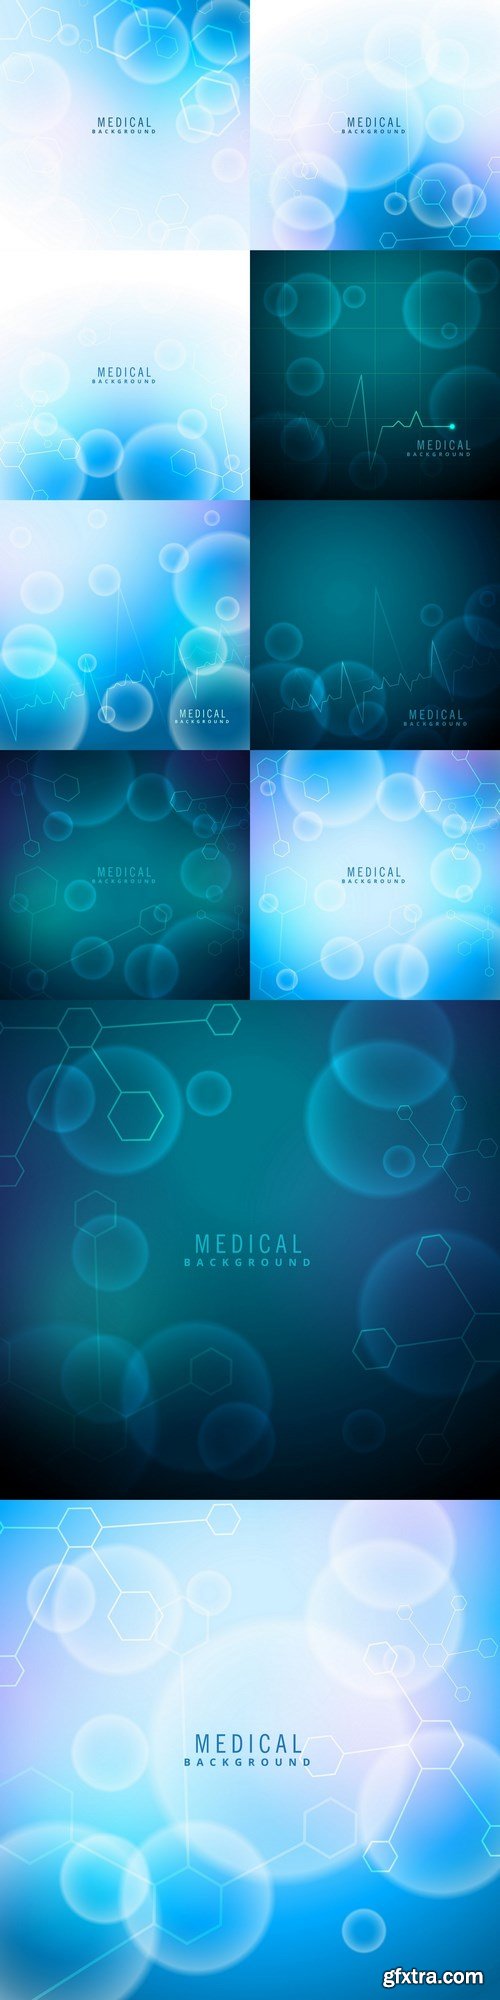 Medical background - 10 EPS Vector Stock